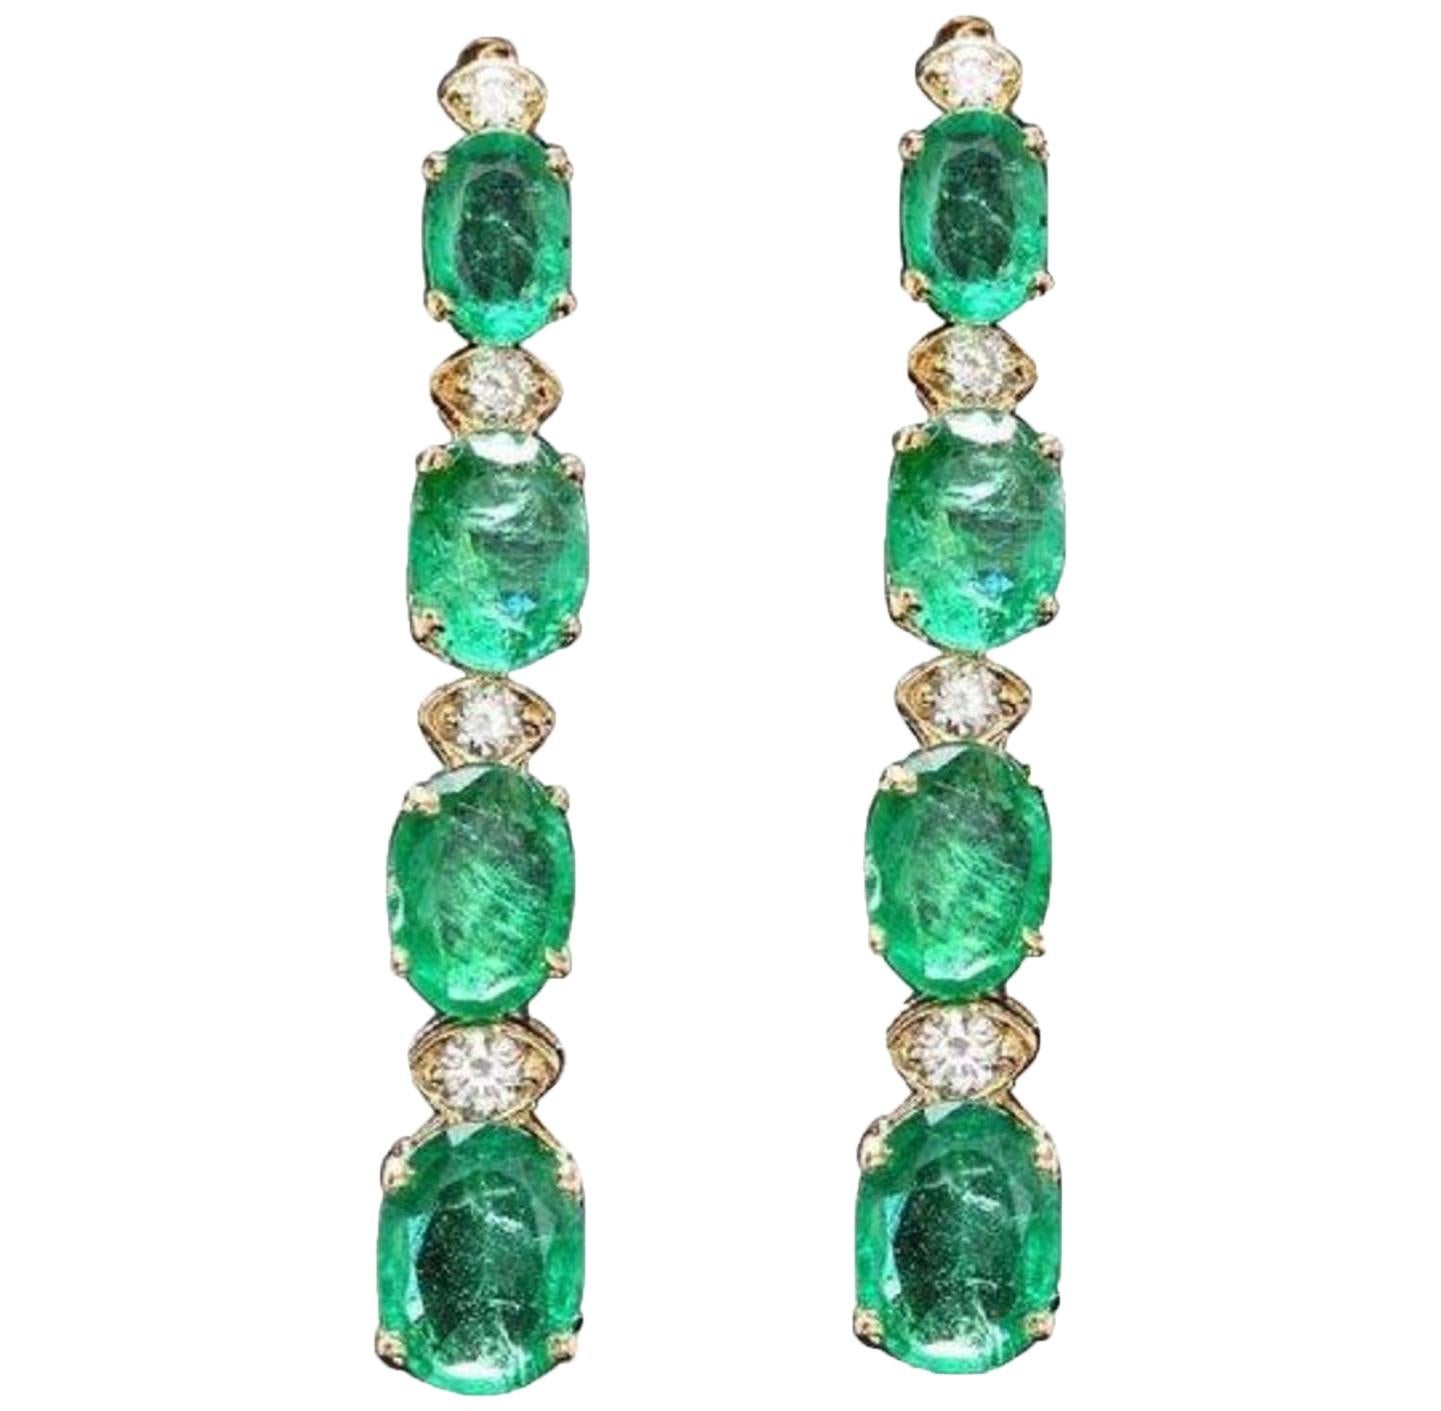 Exquisite 7.30 Carat Natural Emerald and Diamond 14 Karat Solid Gold Earrings